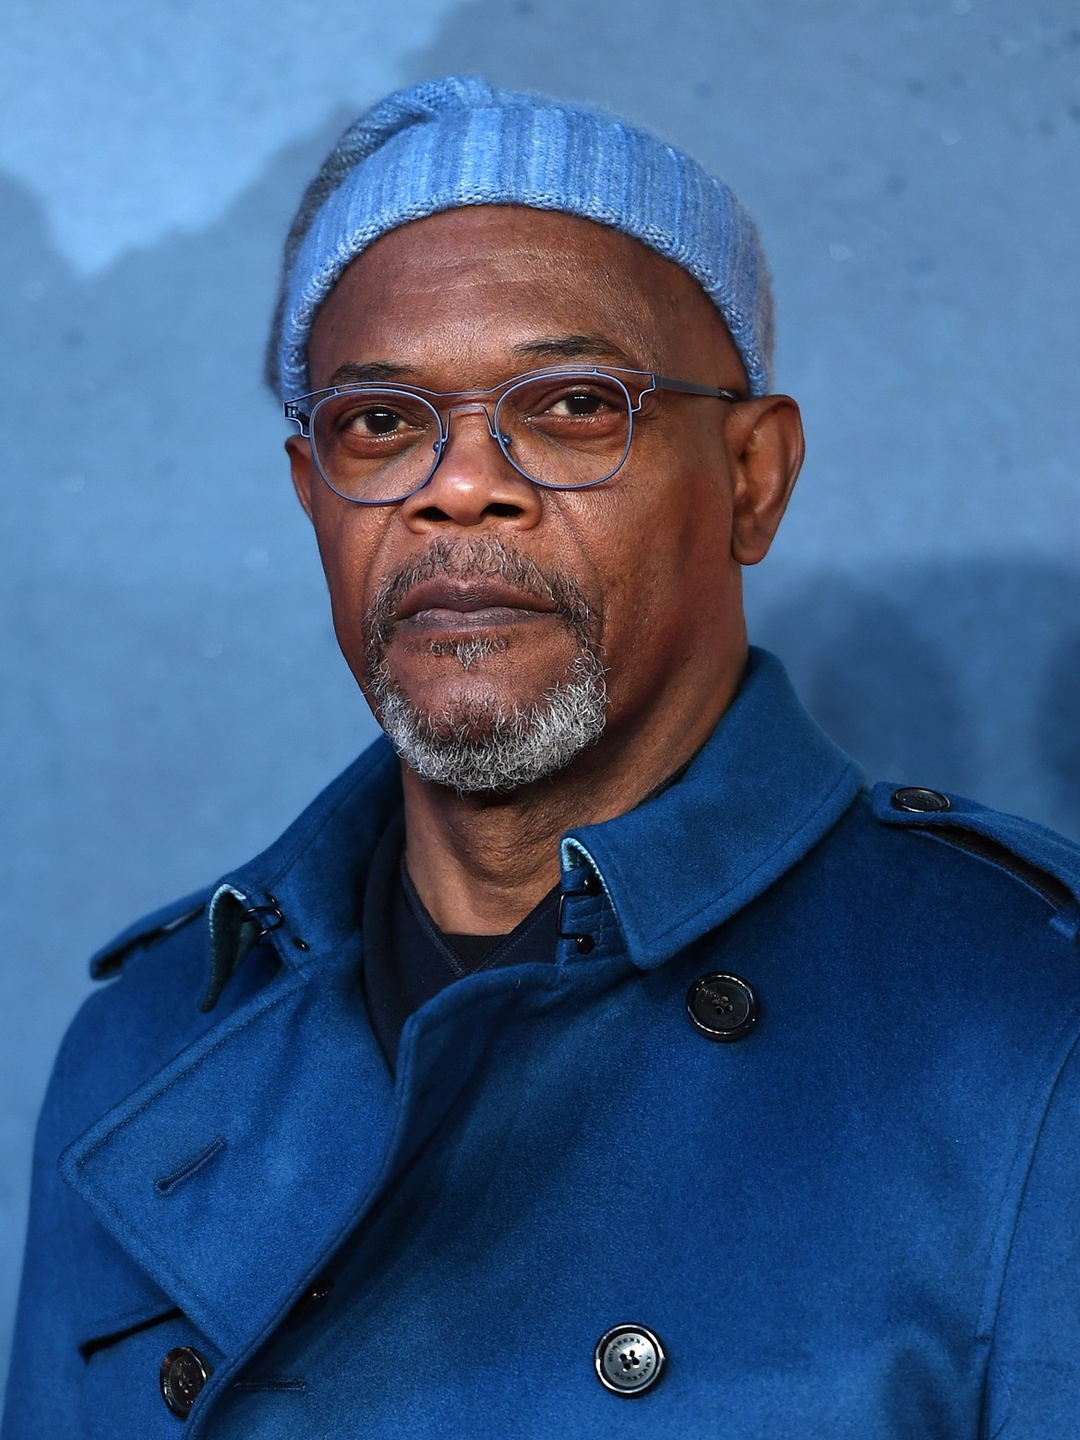 Samuel L. Jackson who is his father